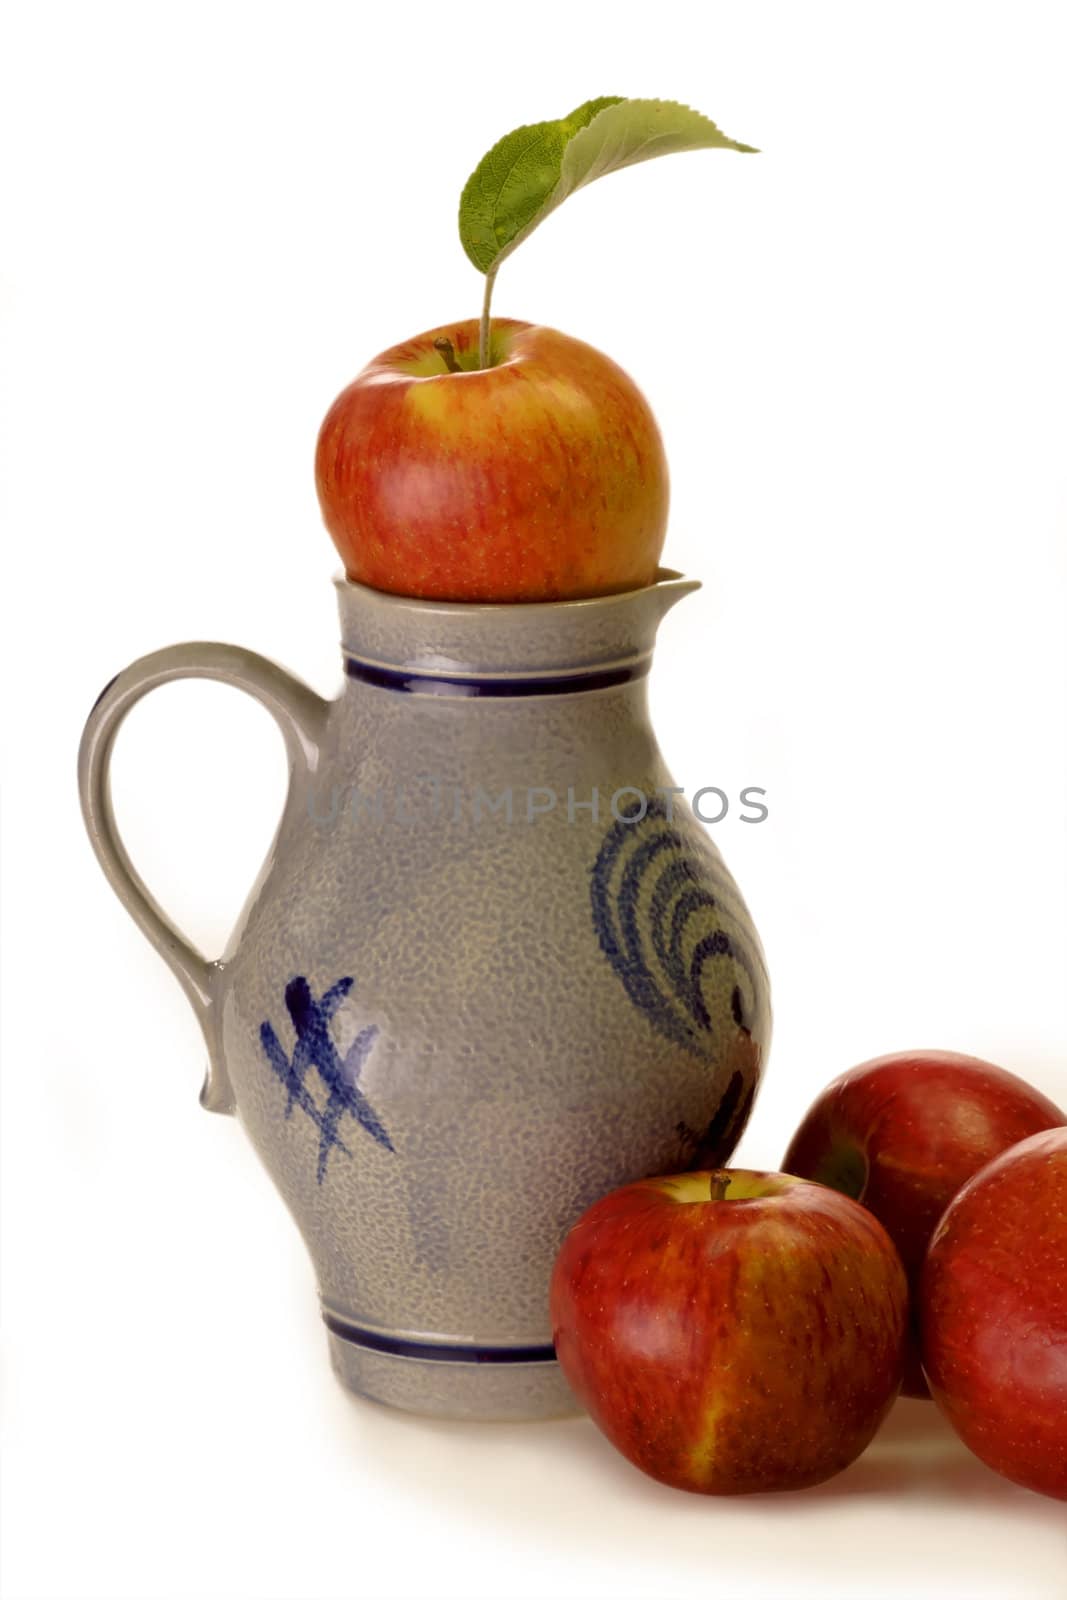 Jug of apple wine and apples on bright background